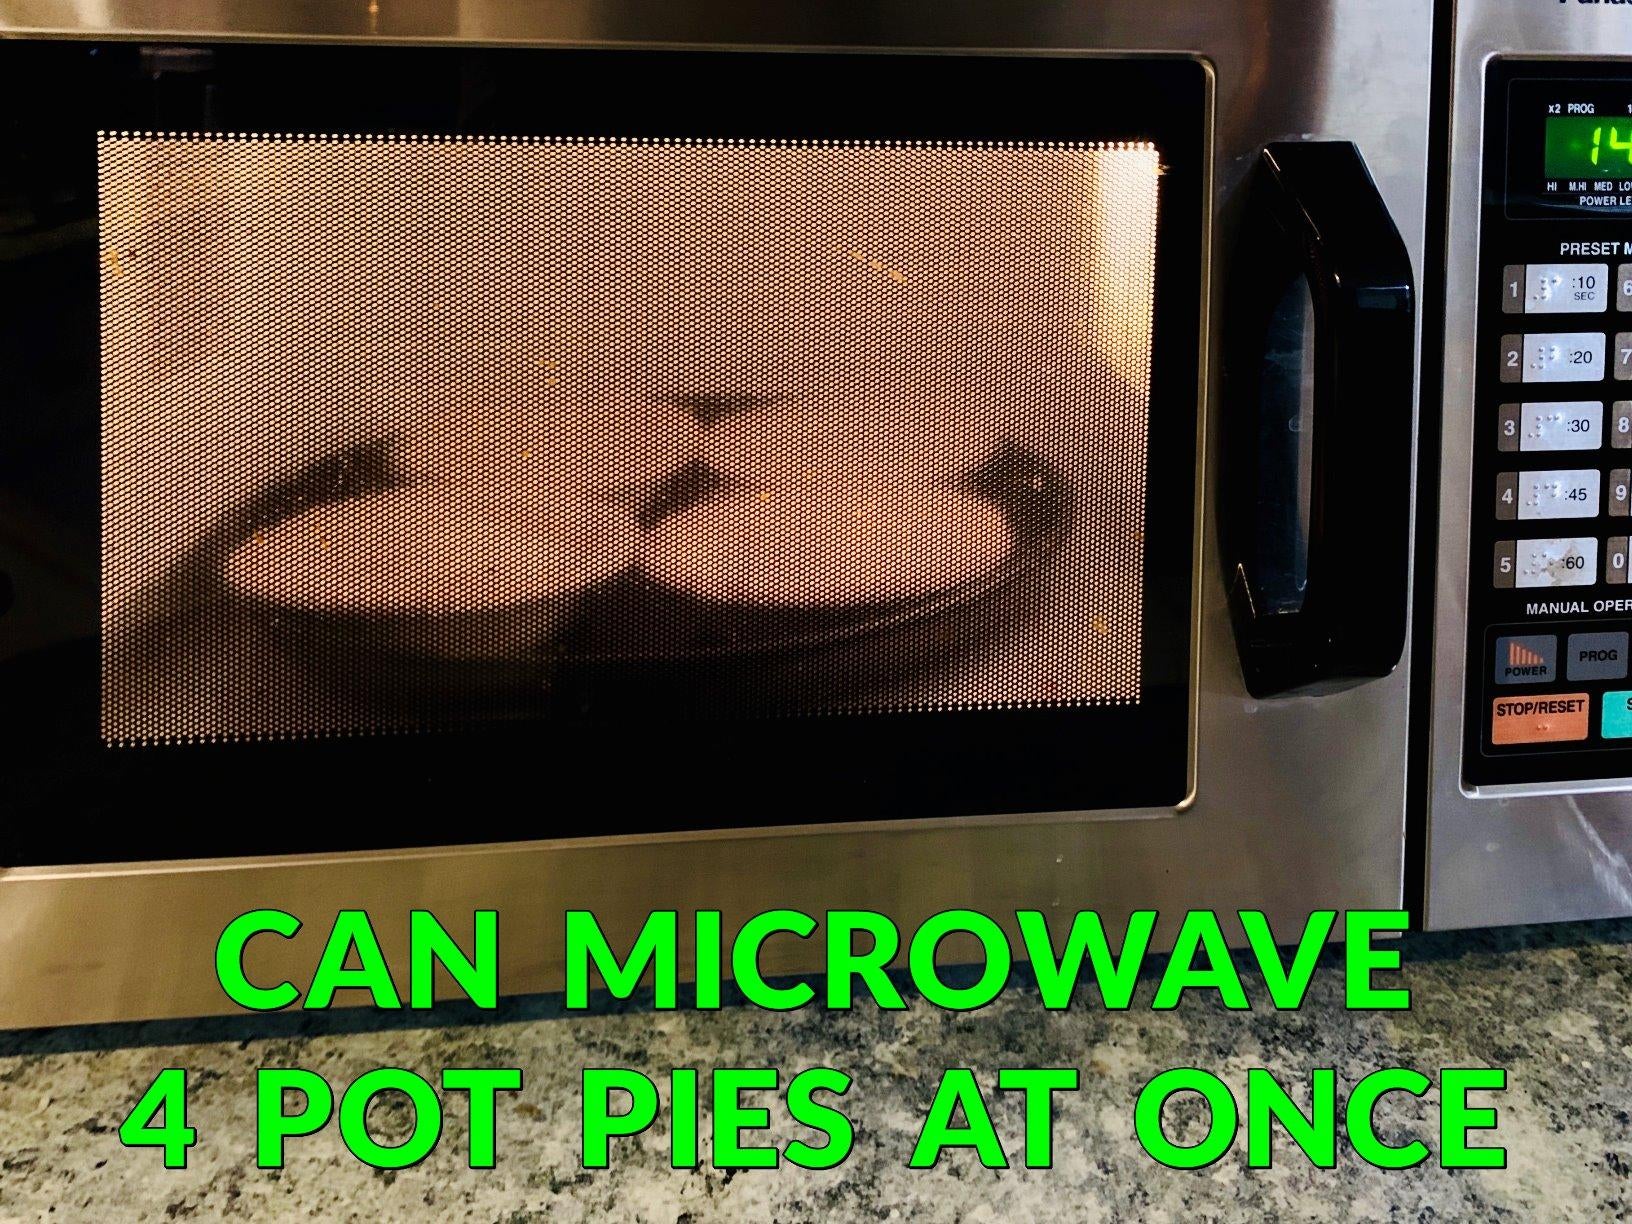 Four pot pies on the microwave crisper inside of the microwave, with text at the bottom that reads: 